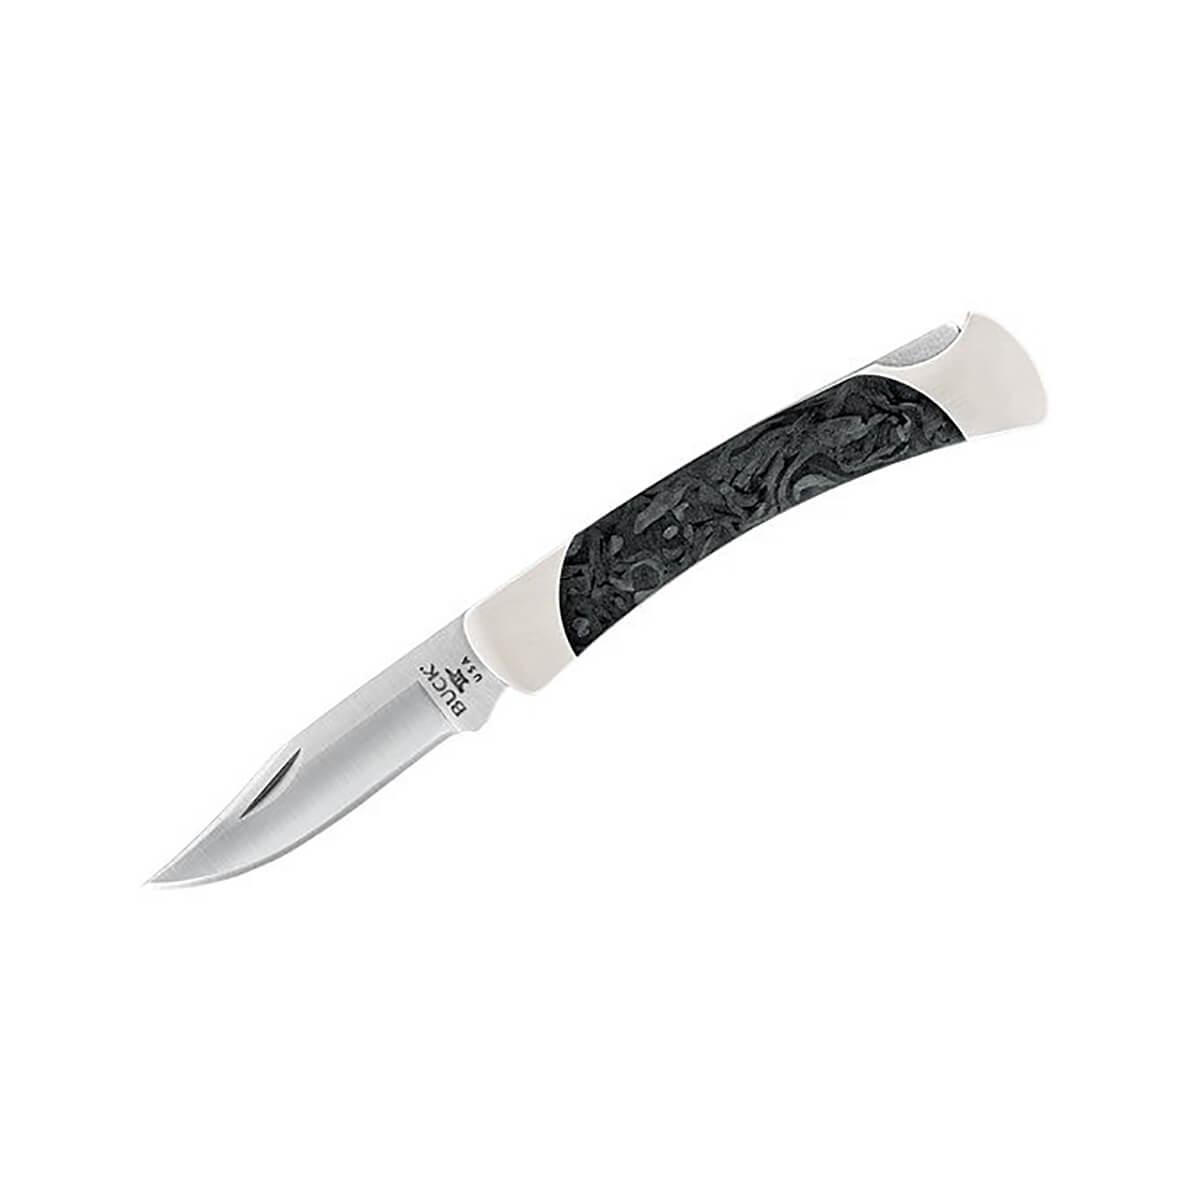  The 55 2021 Legacy Collection Knife